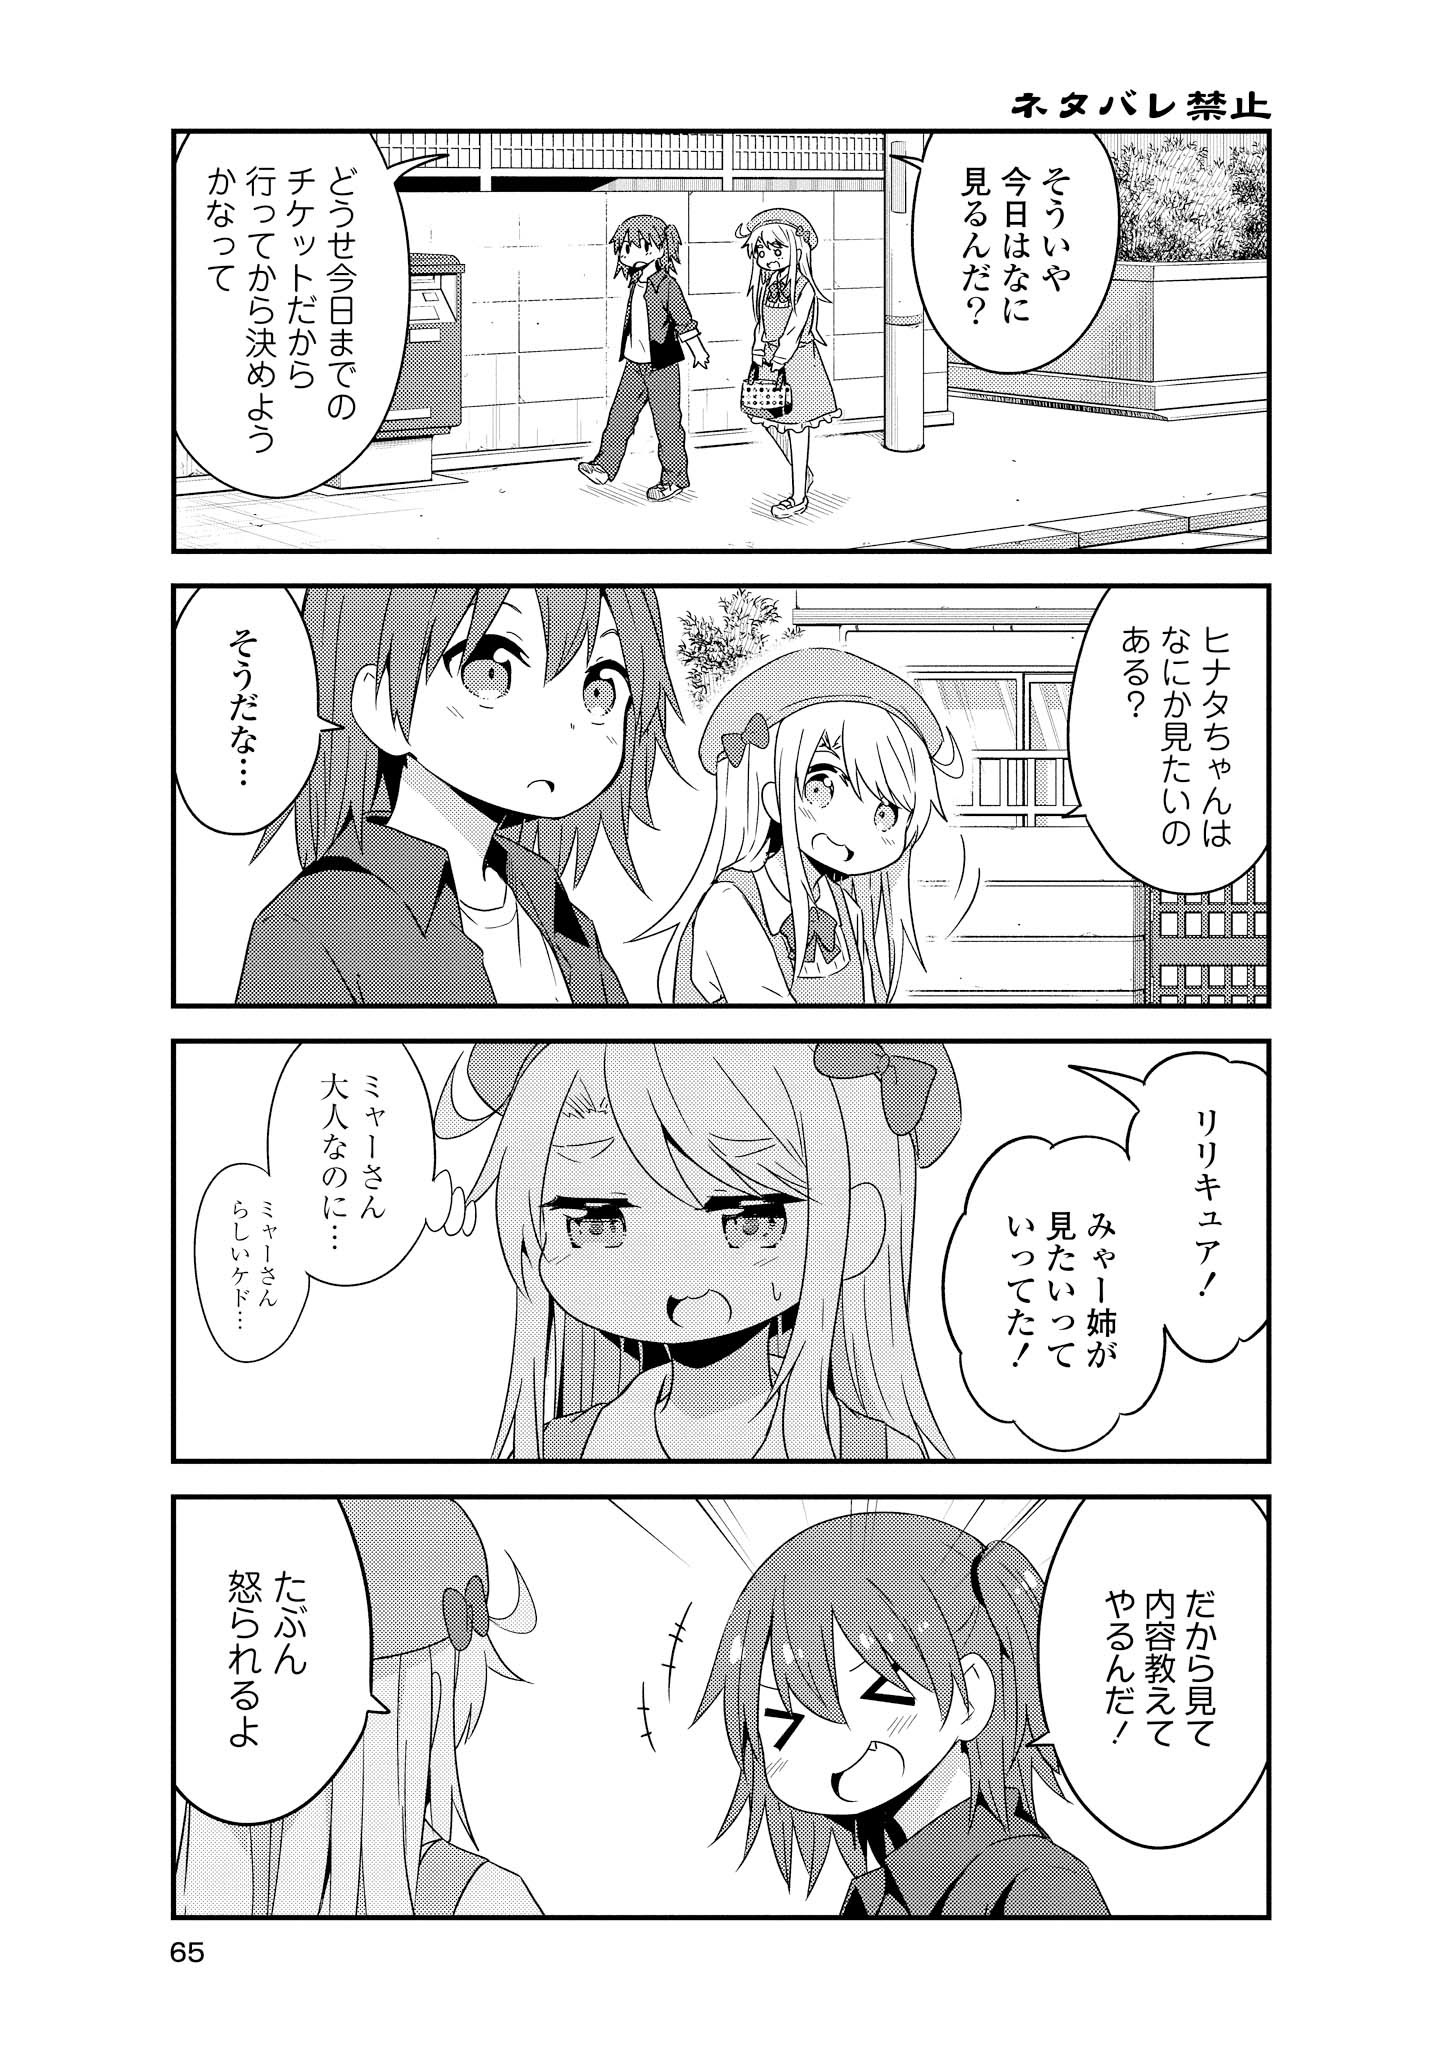 Wataten! An Angel Flew Down to Me 私に天使が舞い降りた！ 第33話 - Page 5